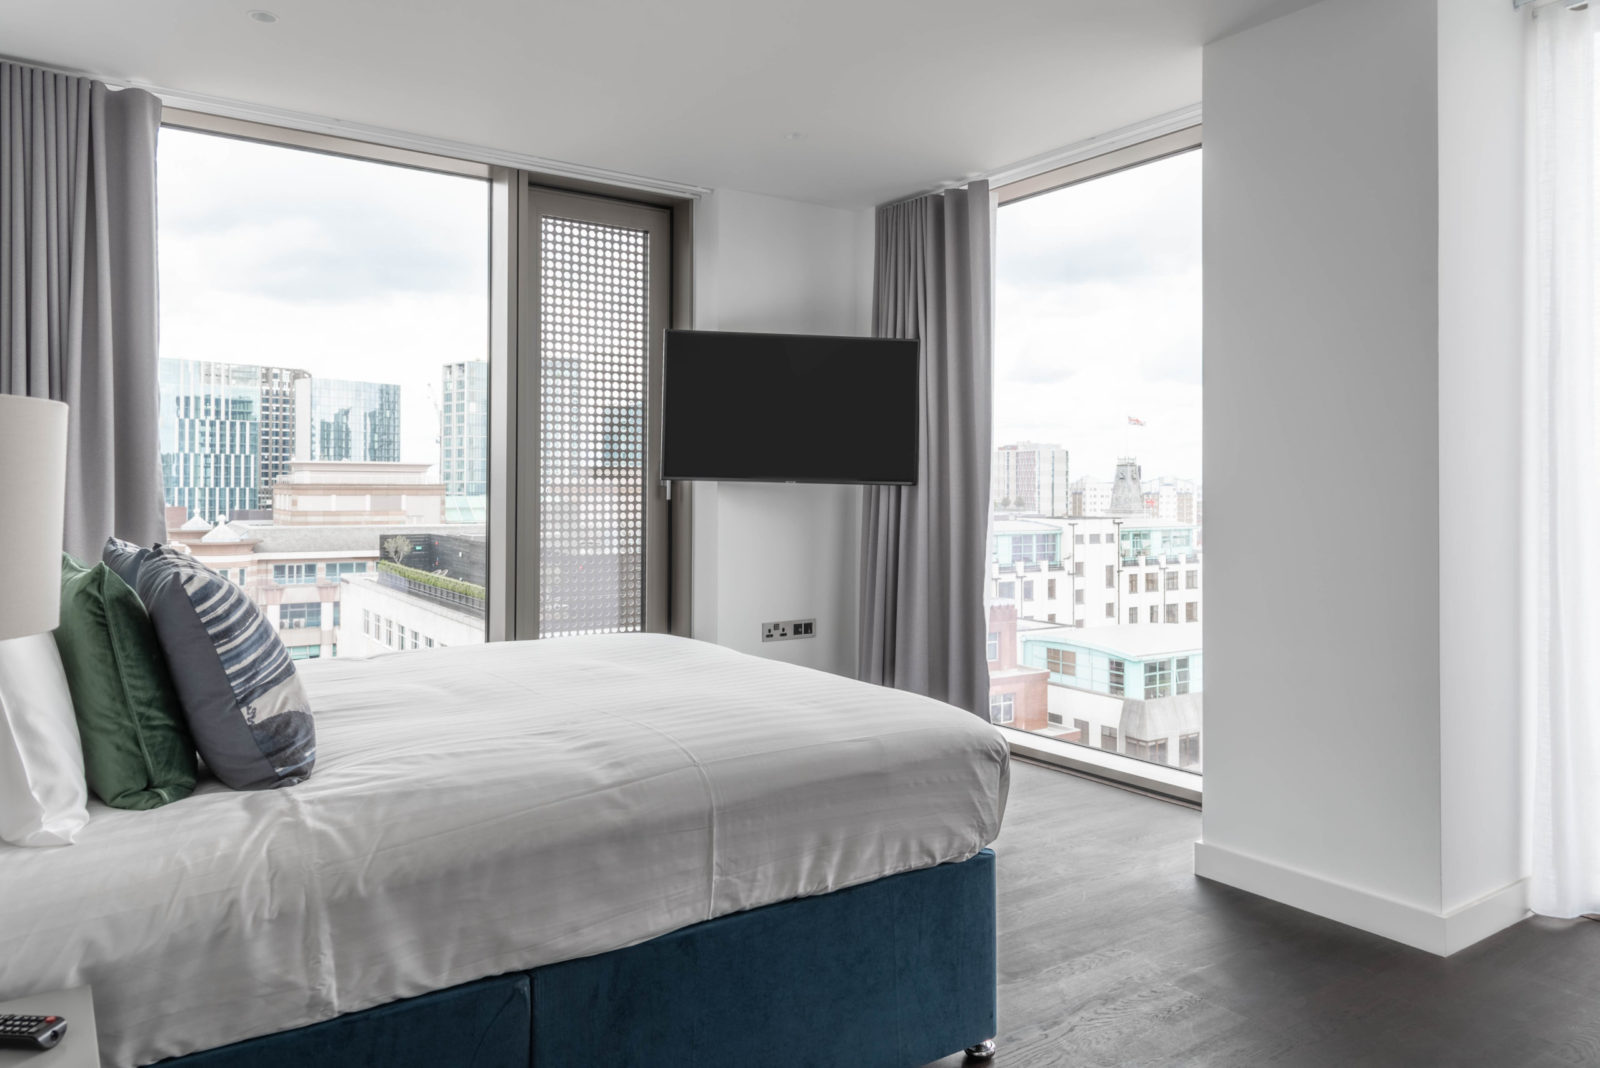 Tower-Hill-Serviced-Accommodation-with-lift,-reception,-pool,-gym,-jacuzzi,-garden-&-cinema!-Book-Luxury-Apartments-in-The-City-of-London-now-Urban-Stay